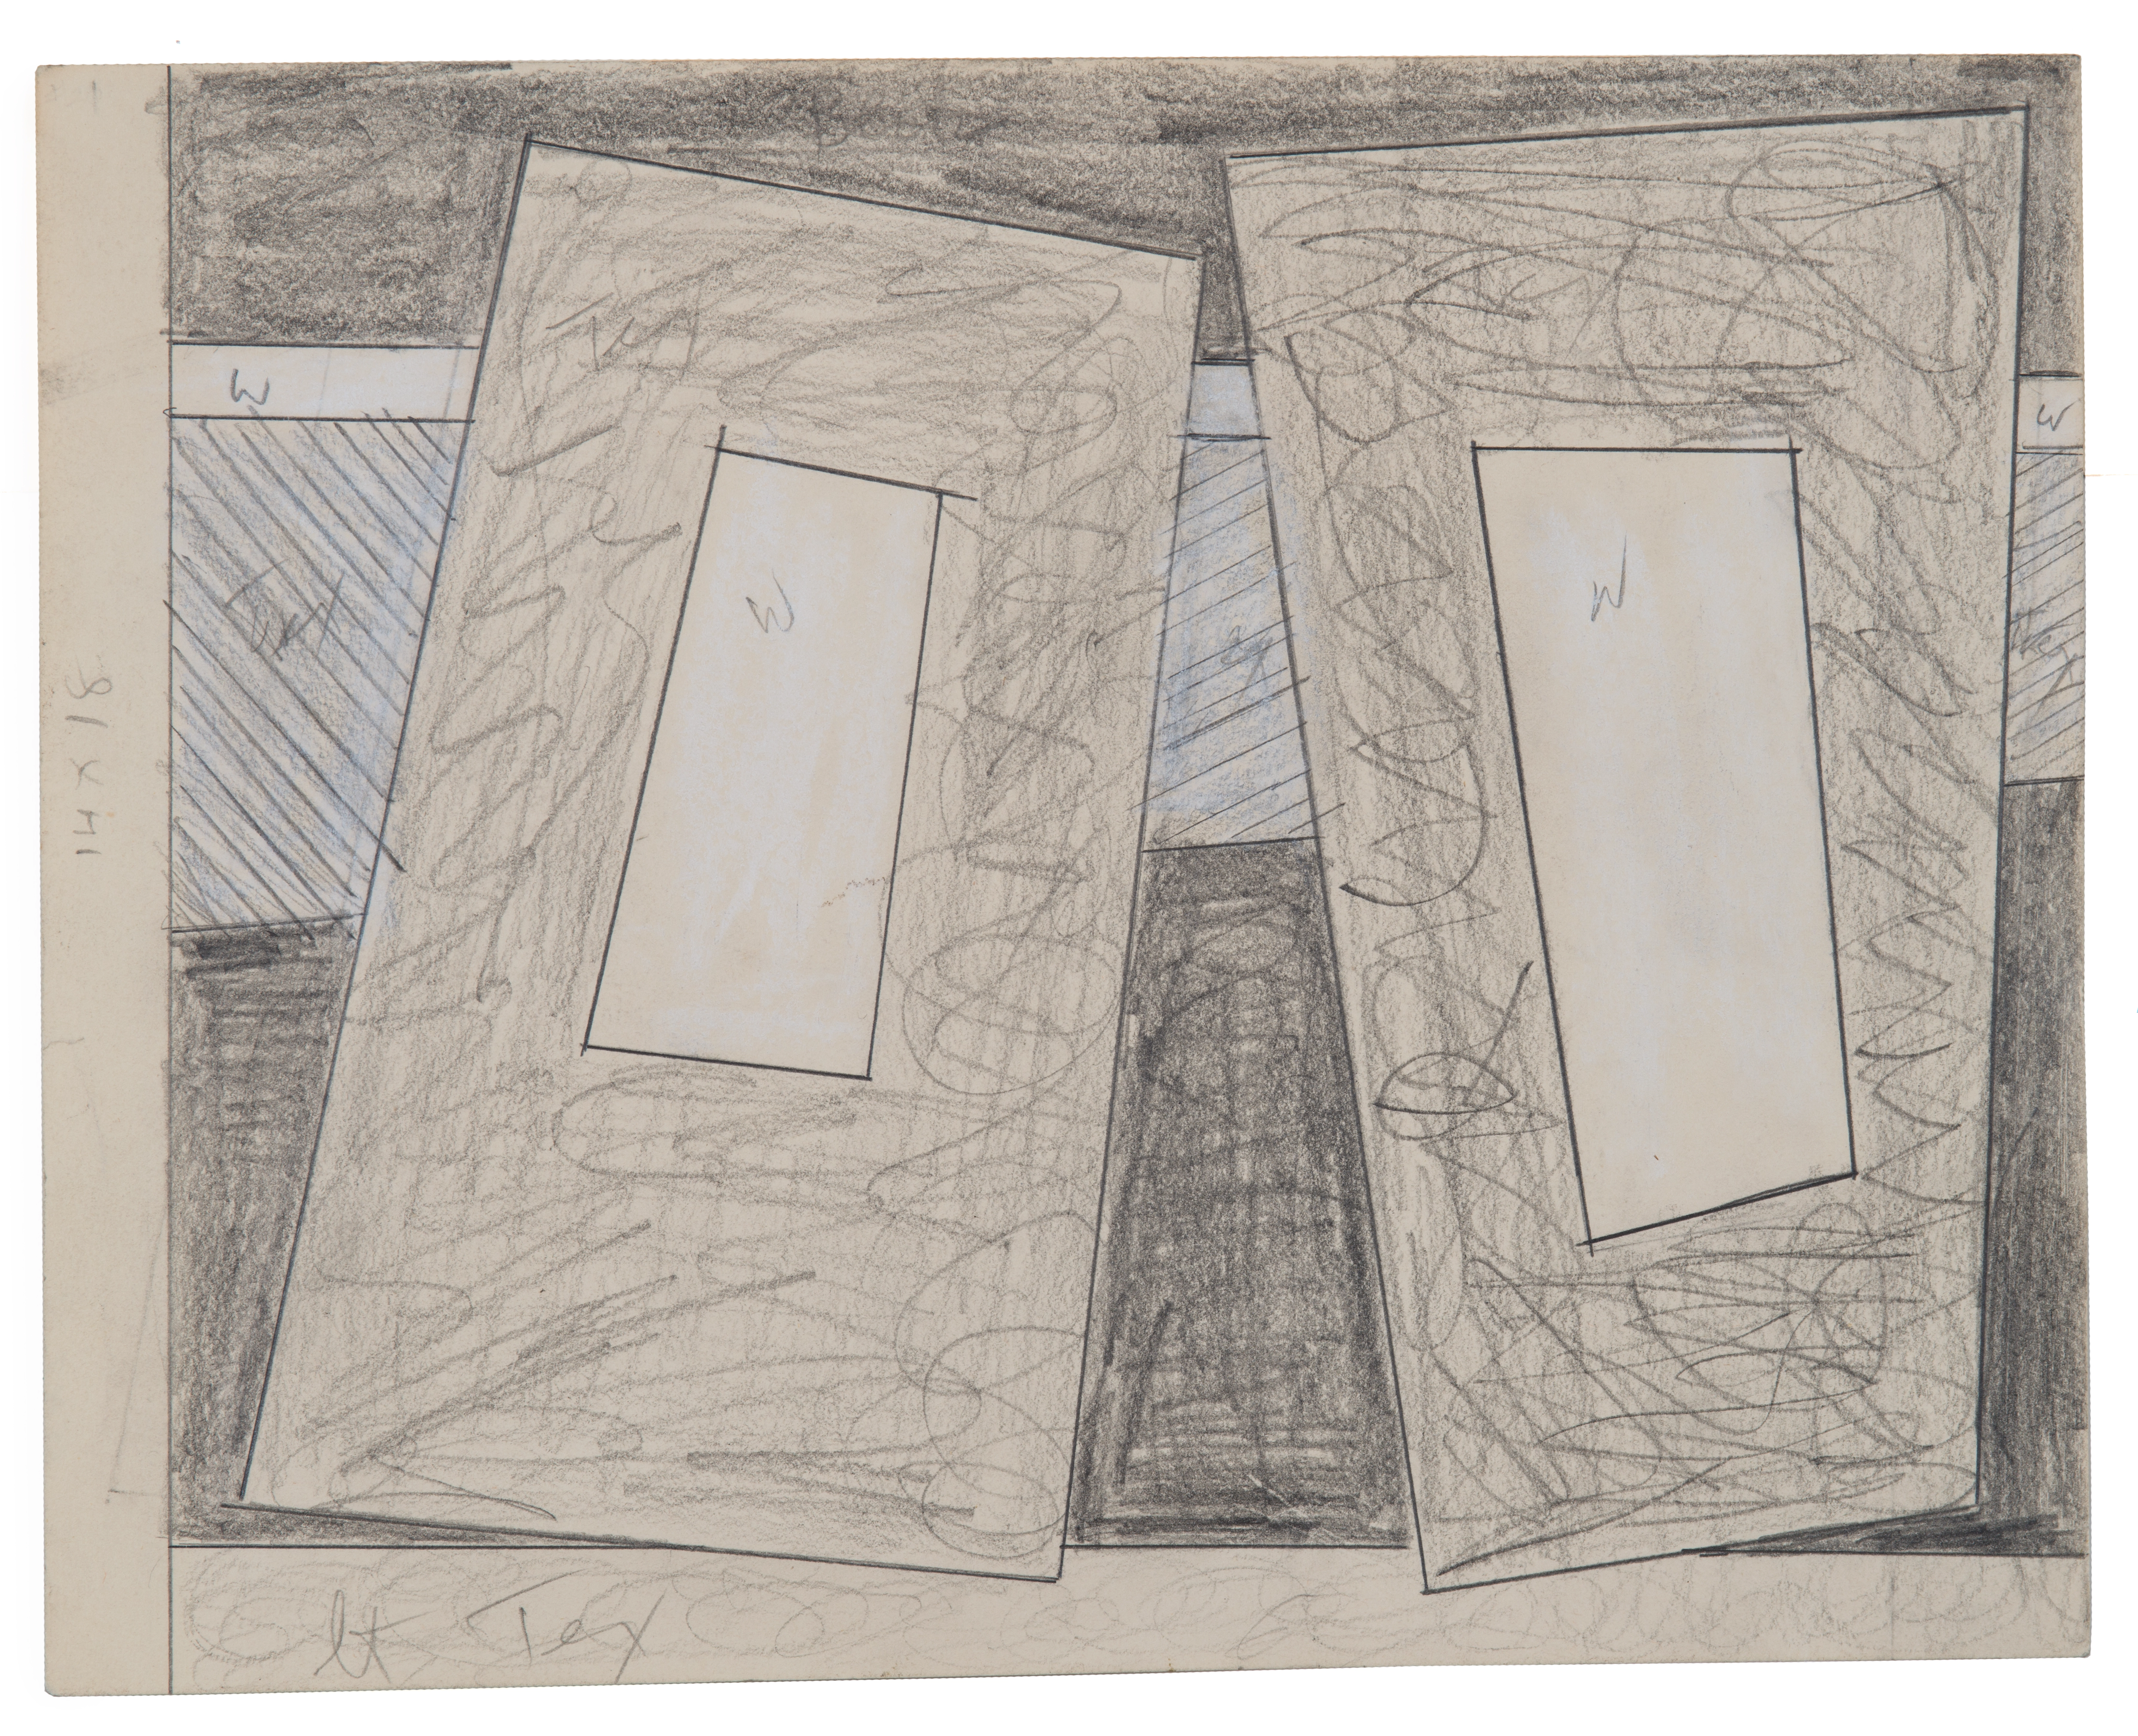 Abstract pencil drawing of two slanted rectangular forms, with smaller white rectangular forms in their centers. Scribble lines are used to mark areas the artist wants shaded a grey tone.